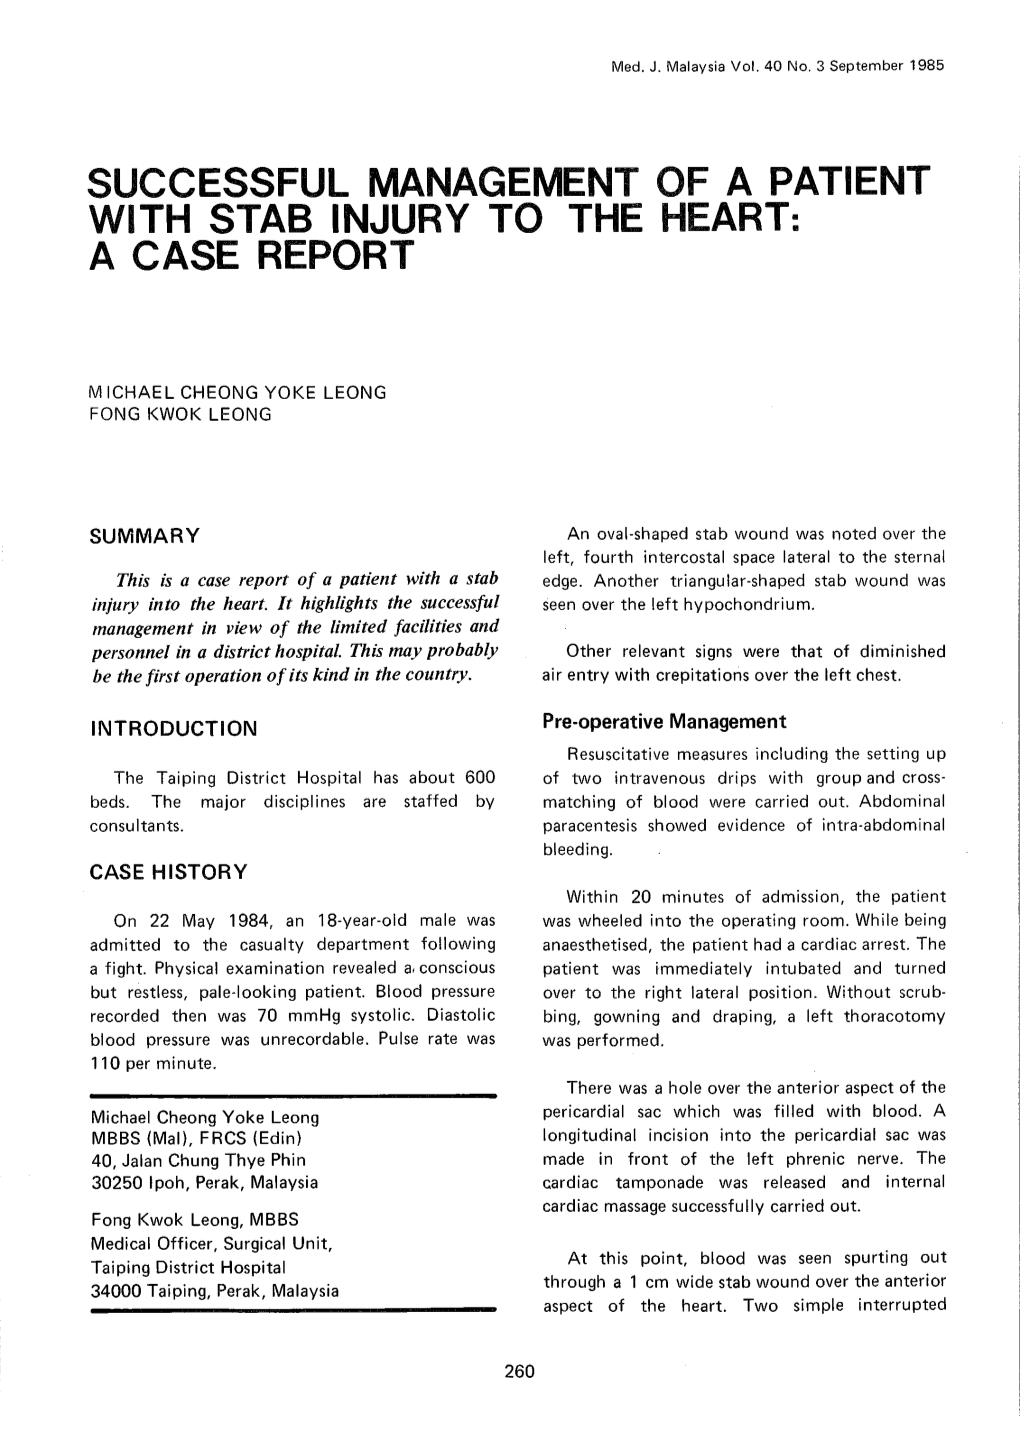 Successful Management of a Patient with Stab Injury to the Heart: a Case Report